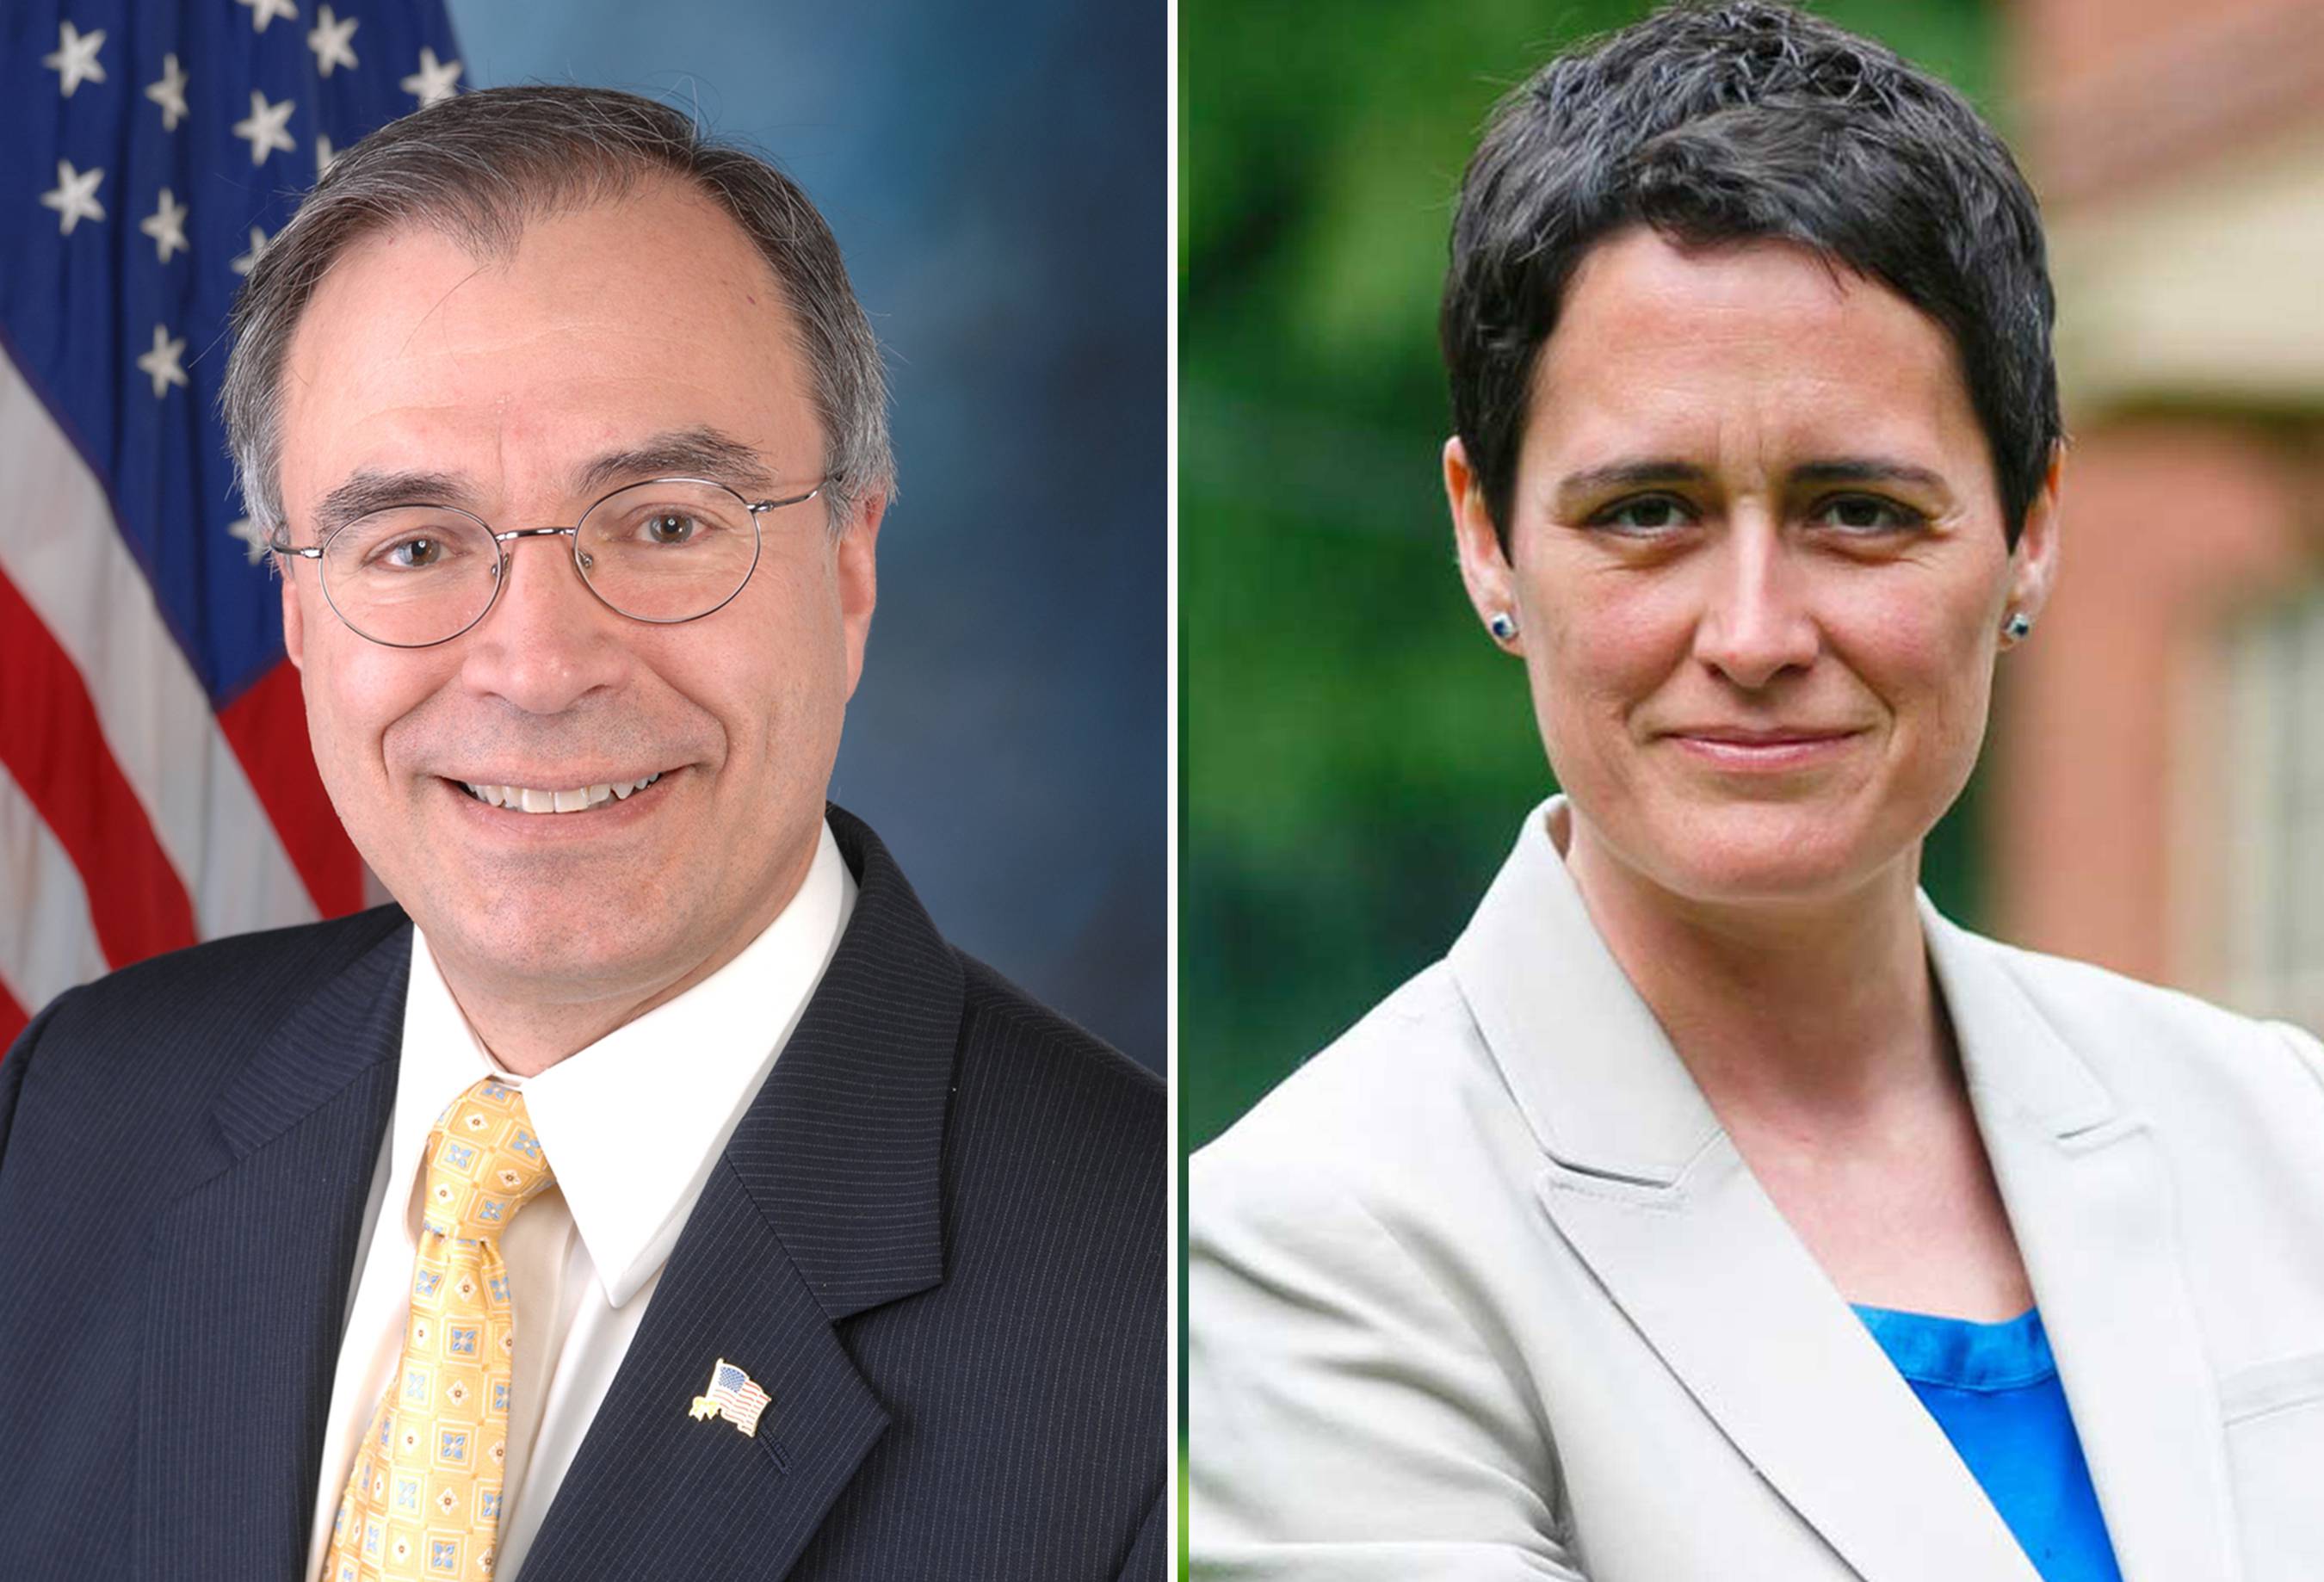 Congressman Andy Harris and Heather Mizeur, 1st District Democratic Congressional candidate..